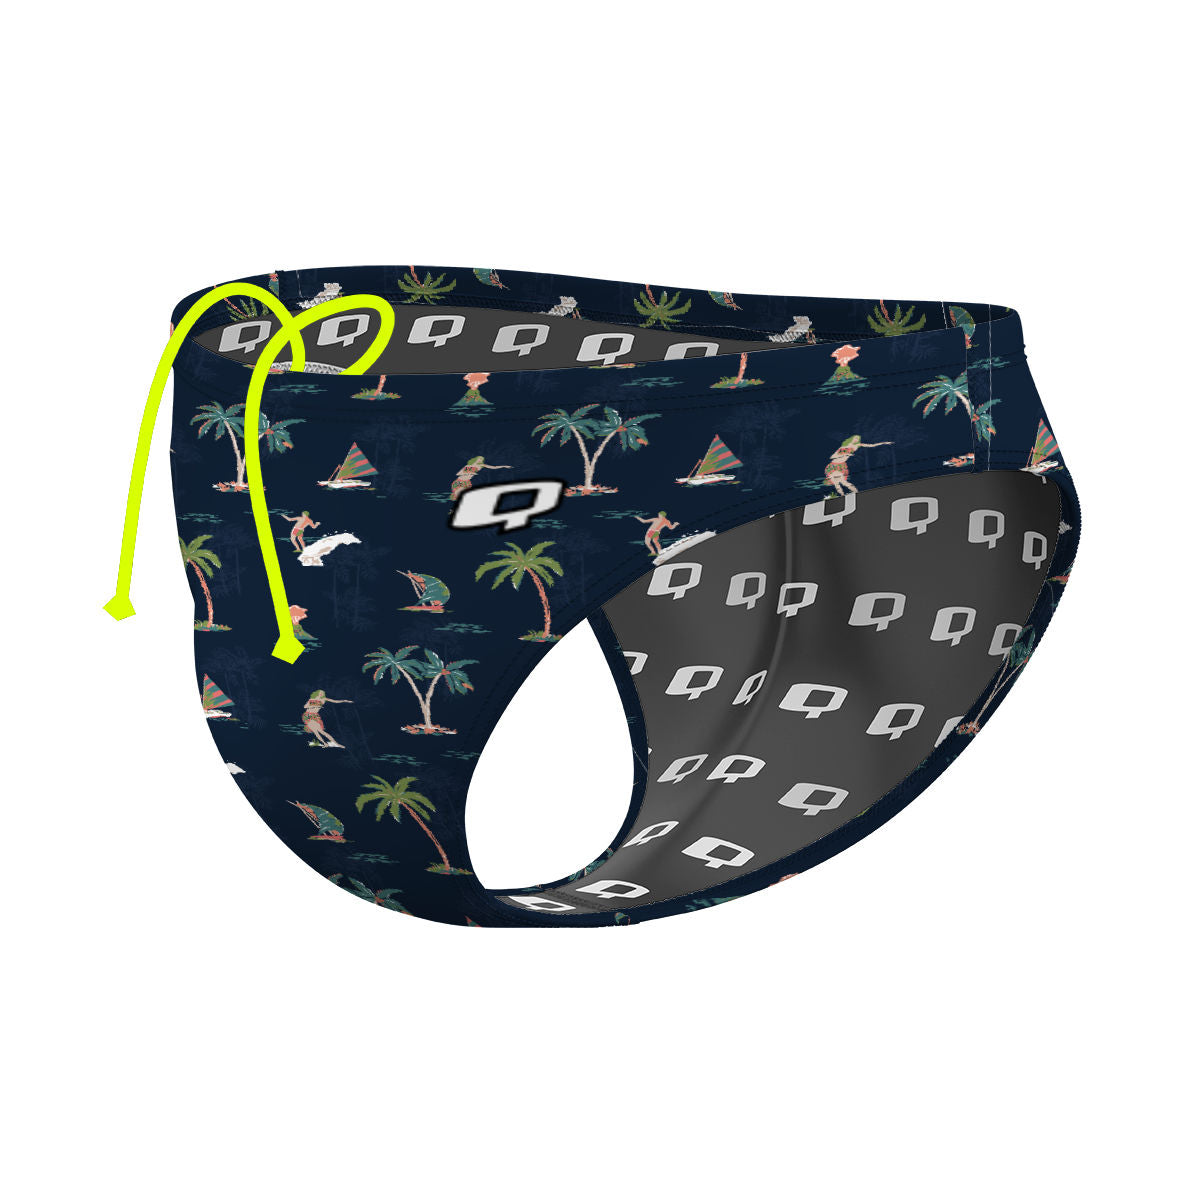 Mahalo - Waterpolo Brief Swimsuit